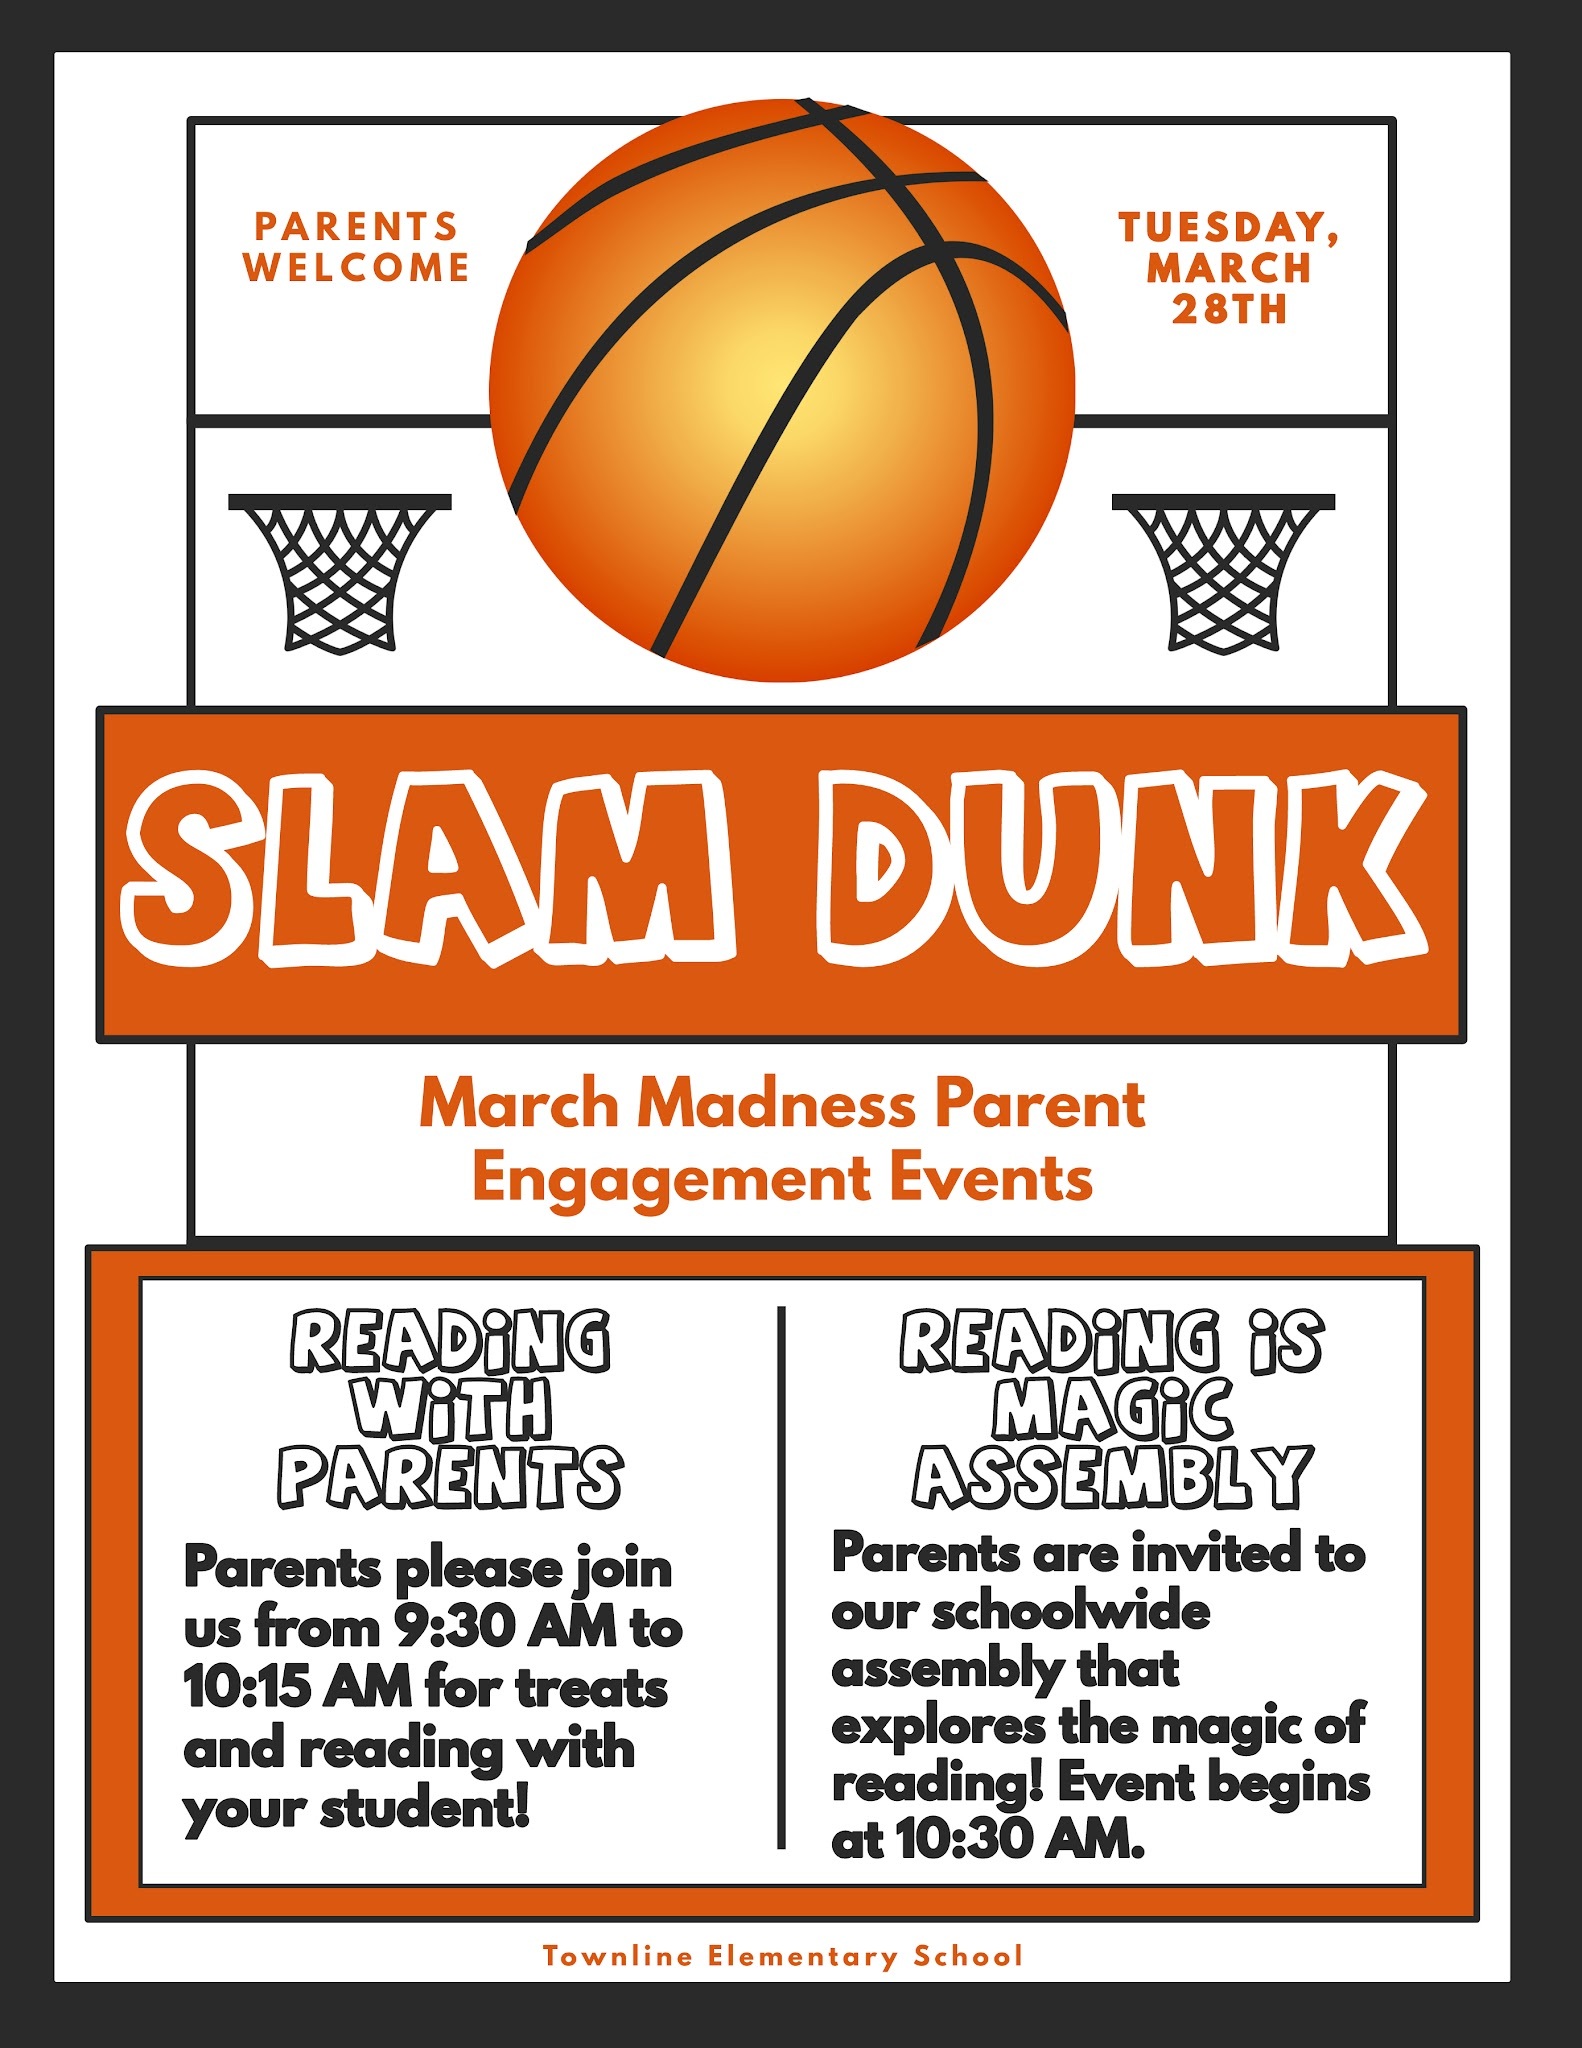 Slam Dunk reading day on March 28 at 9:30am parents are invited.